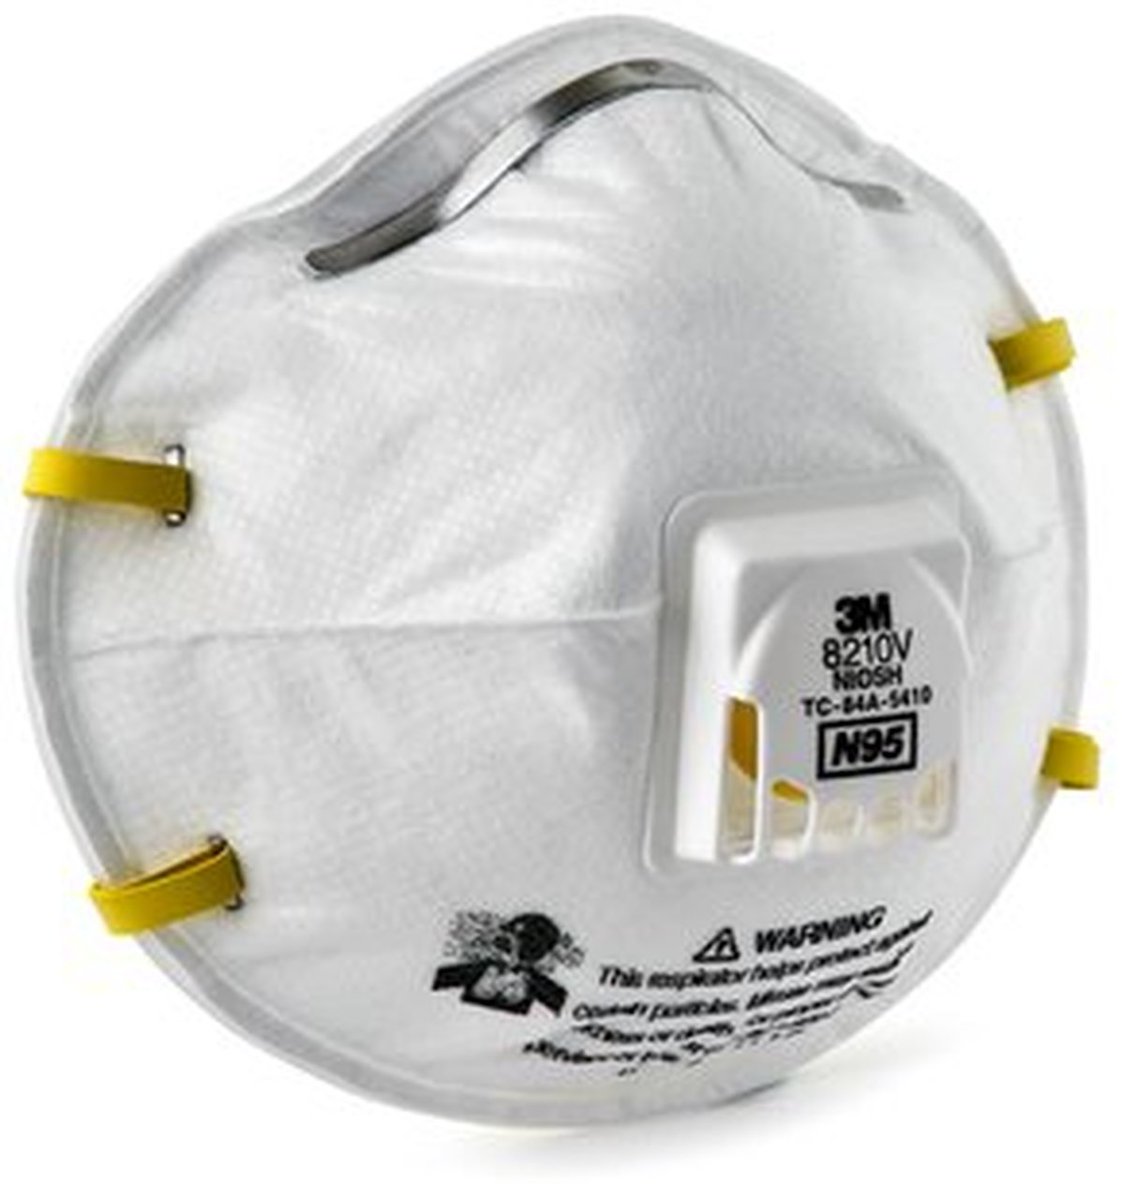 Those of you who are doctors and nurses, think of the number of times you have tied a surgical mask to your face in the past.Now think of the number of times you have fitted a close-fitting respirator mask, and tested it for airtightness etc.